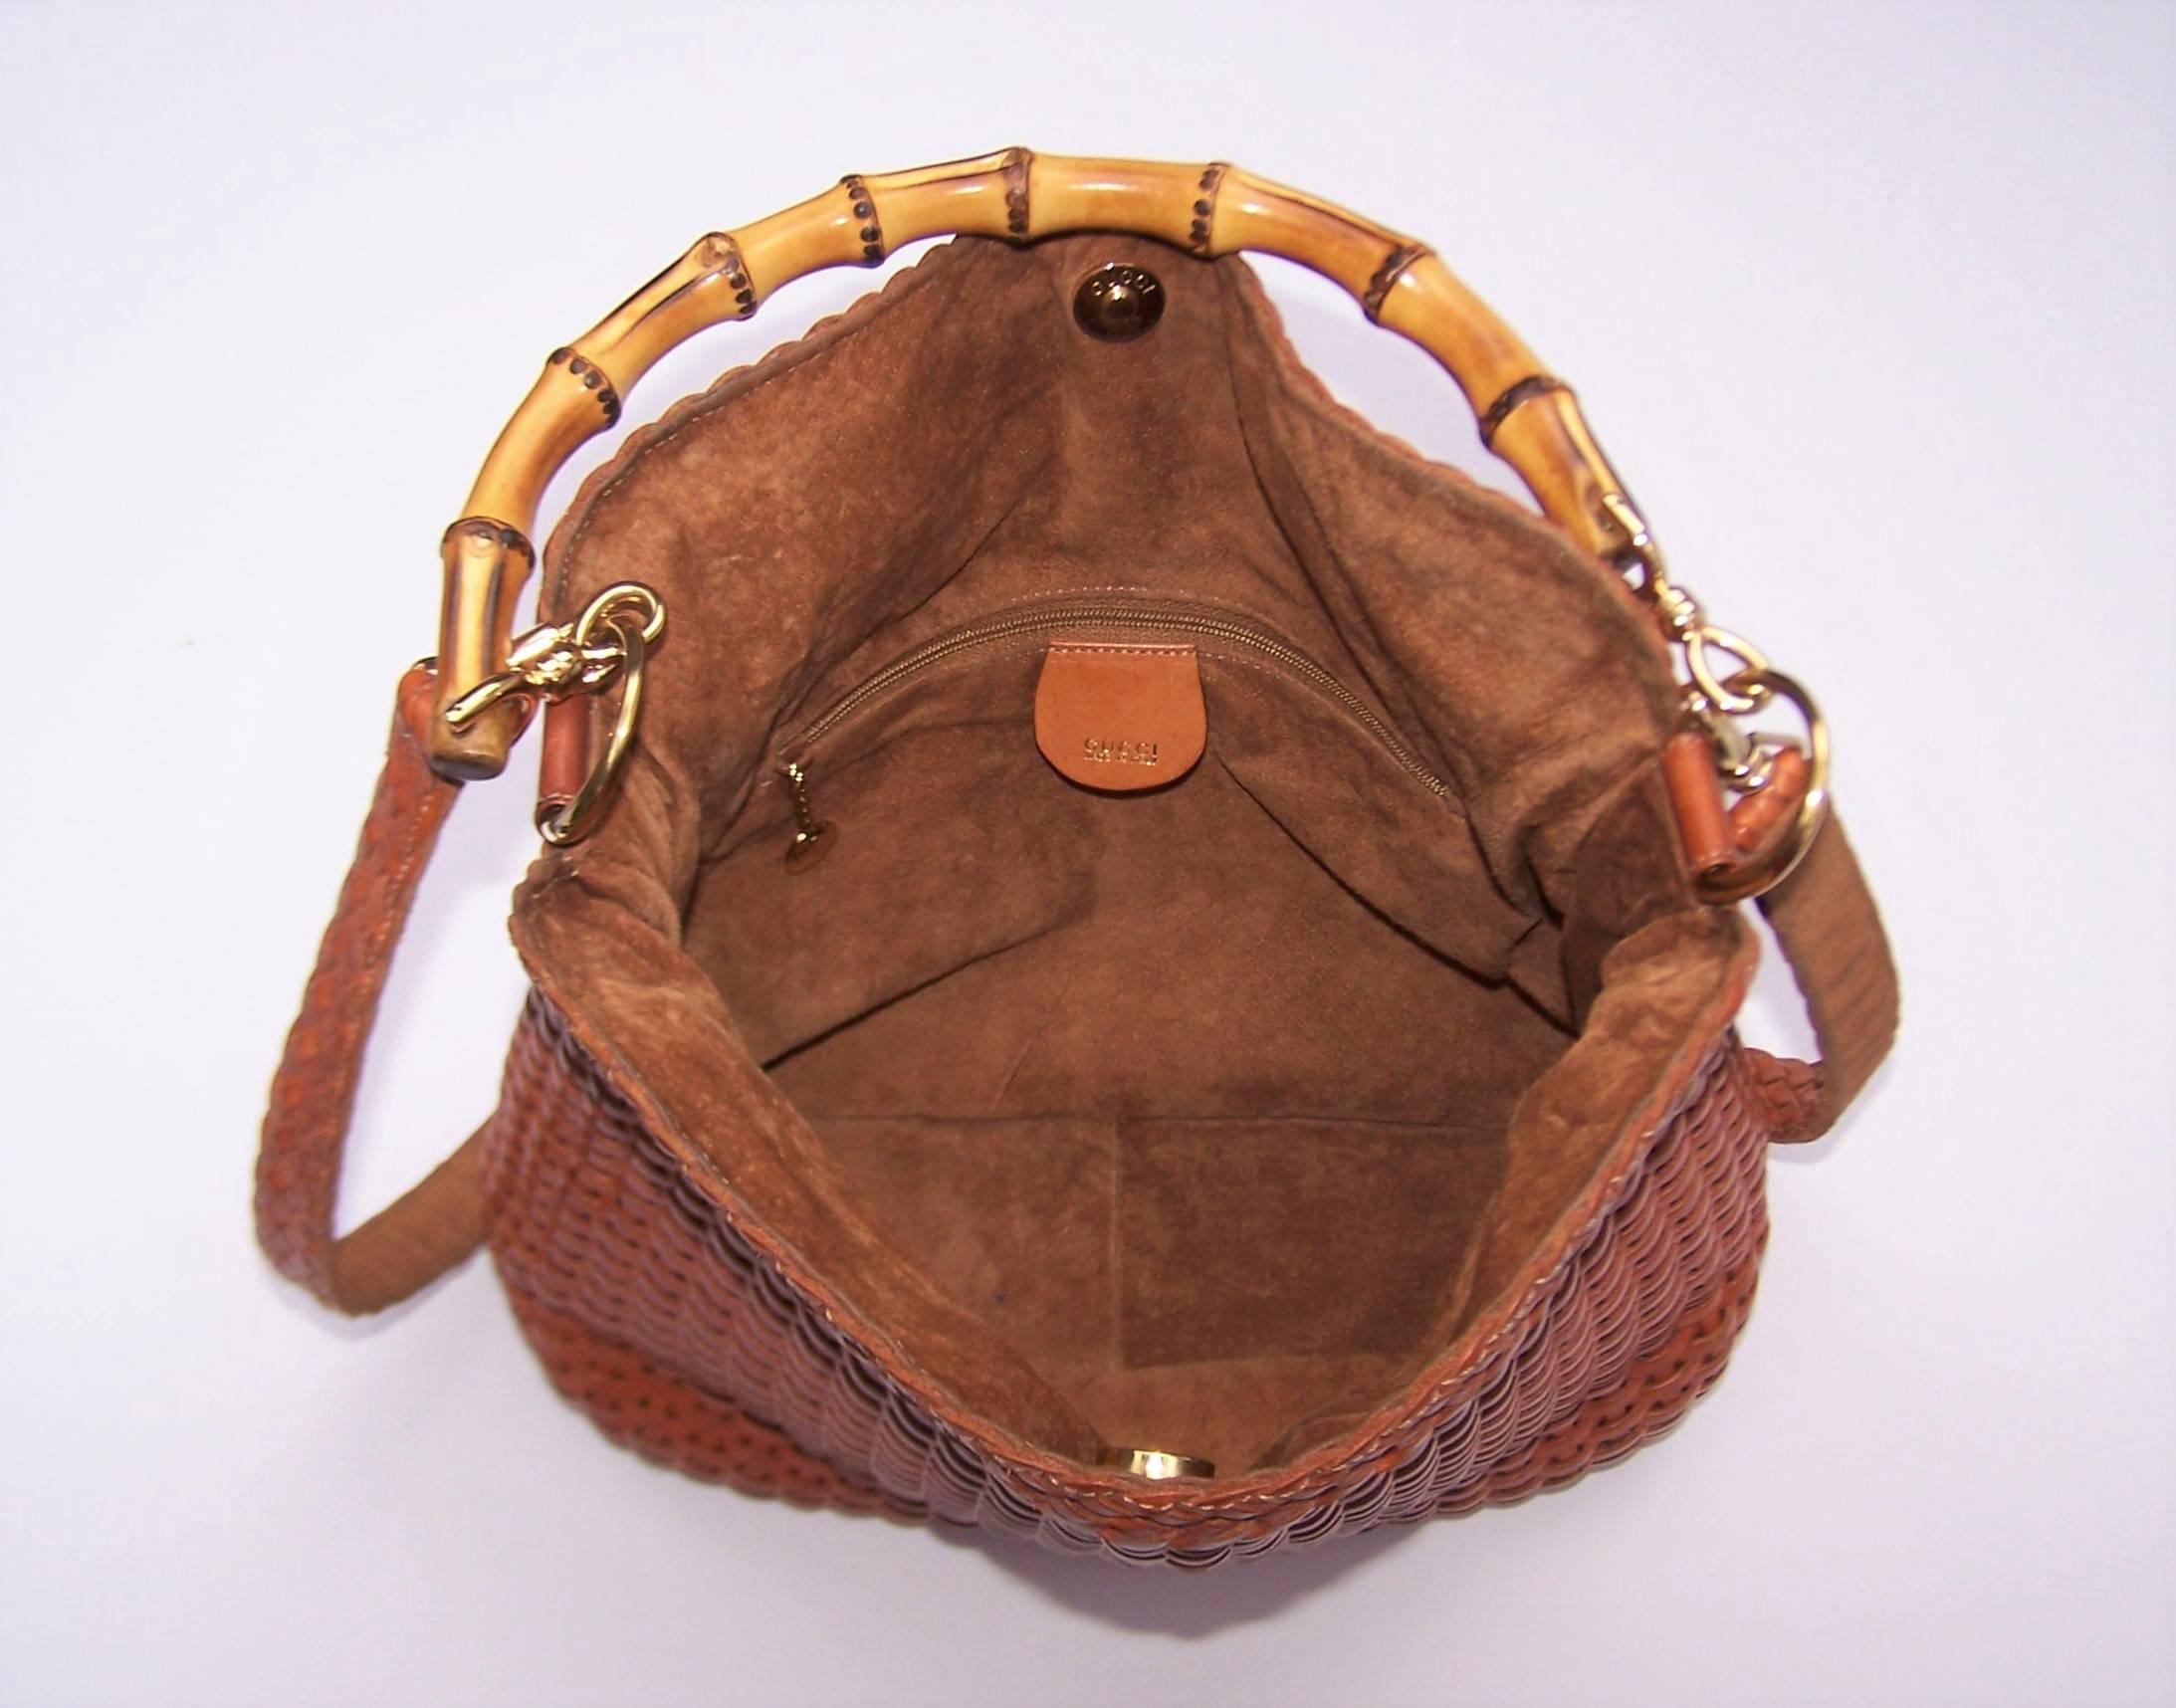 C.1990 Gucci Cognac Woven Leather Handbag With Bamboo Handle 1